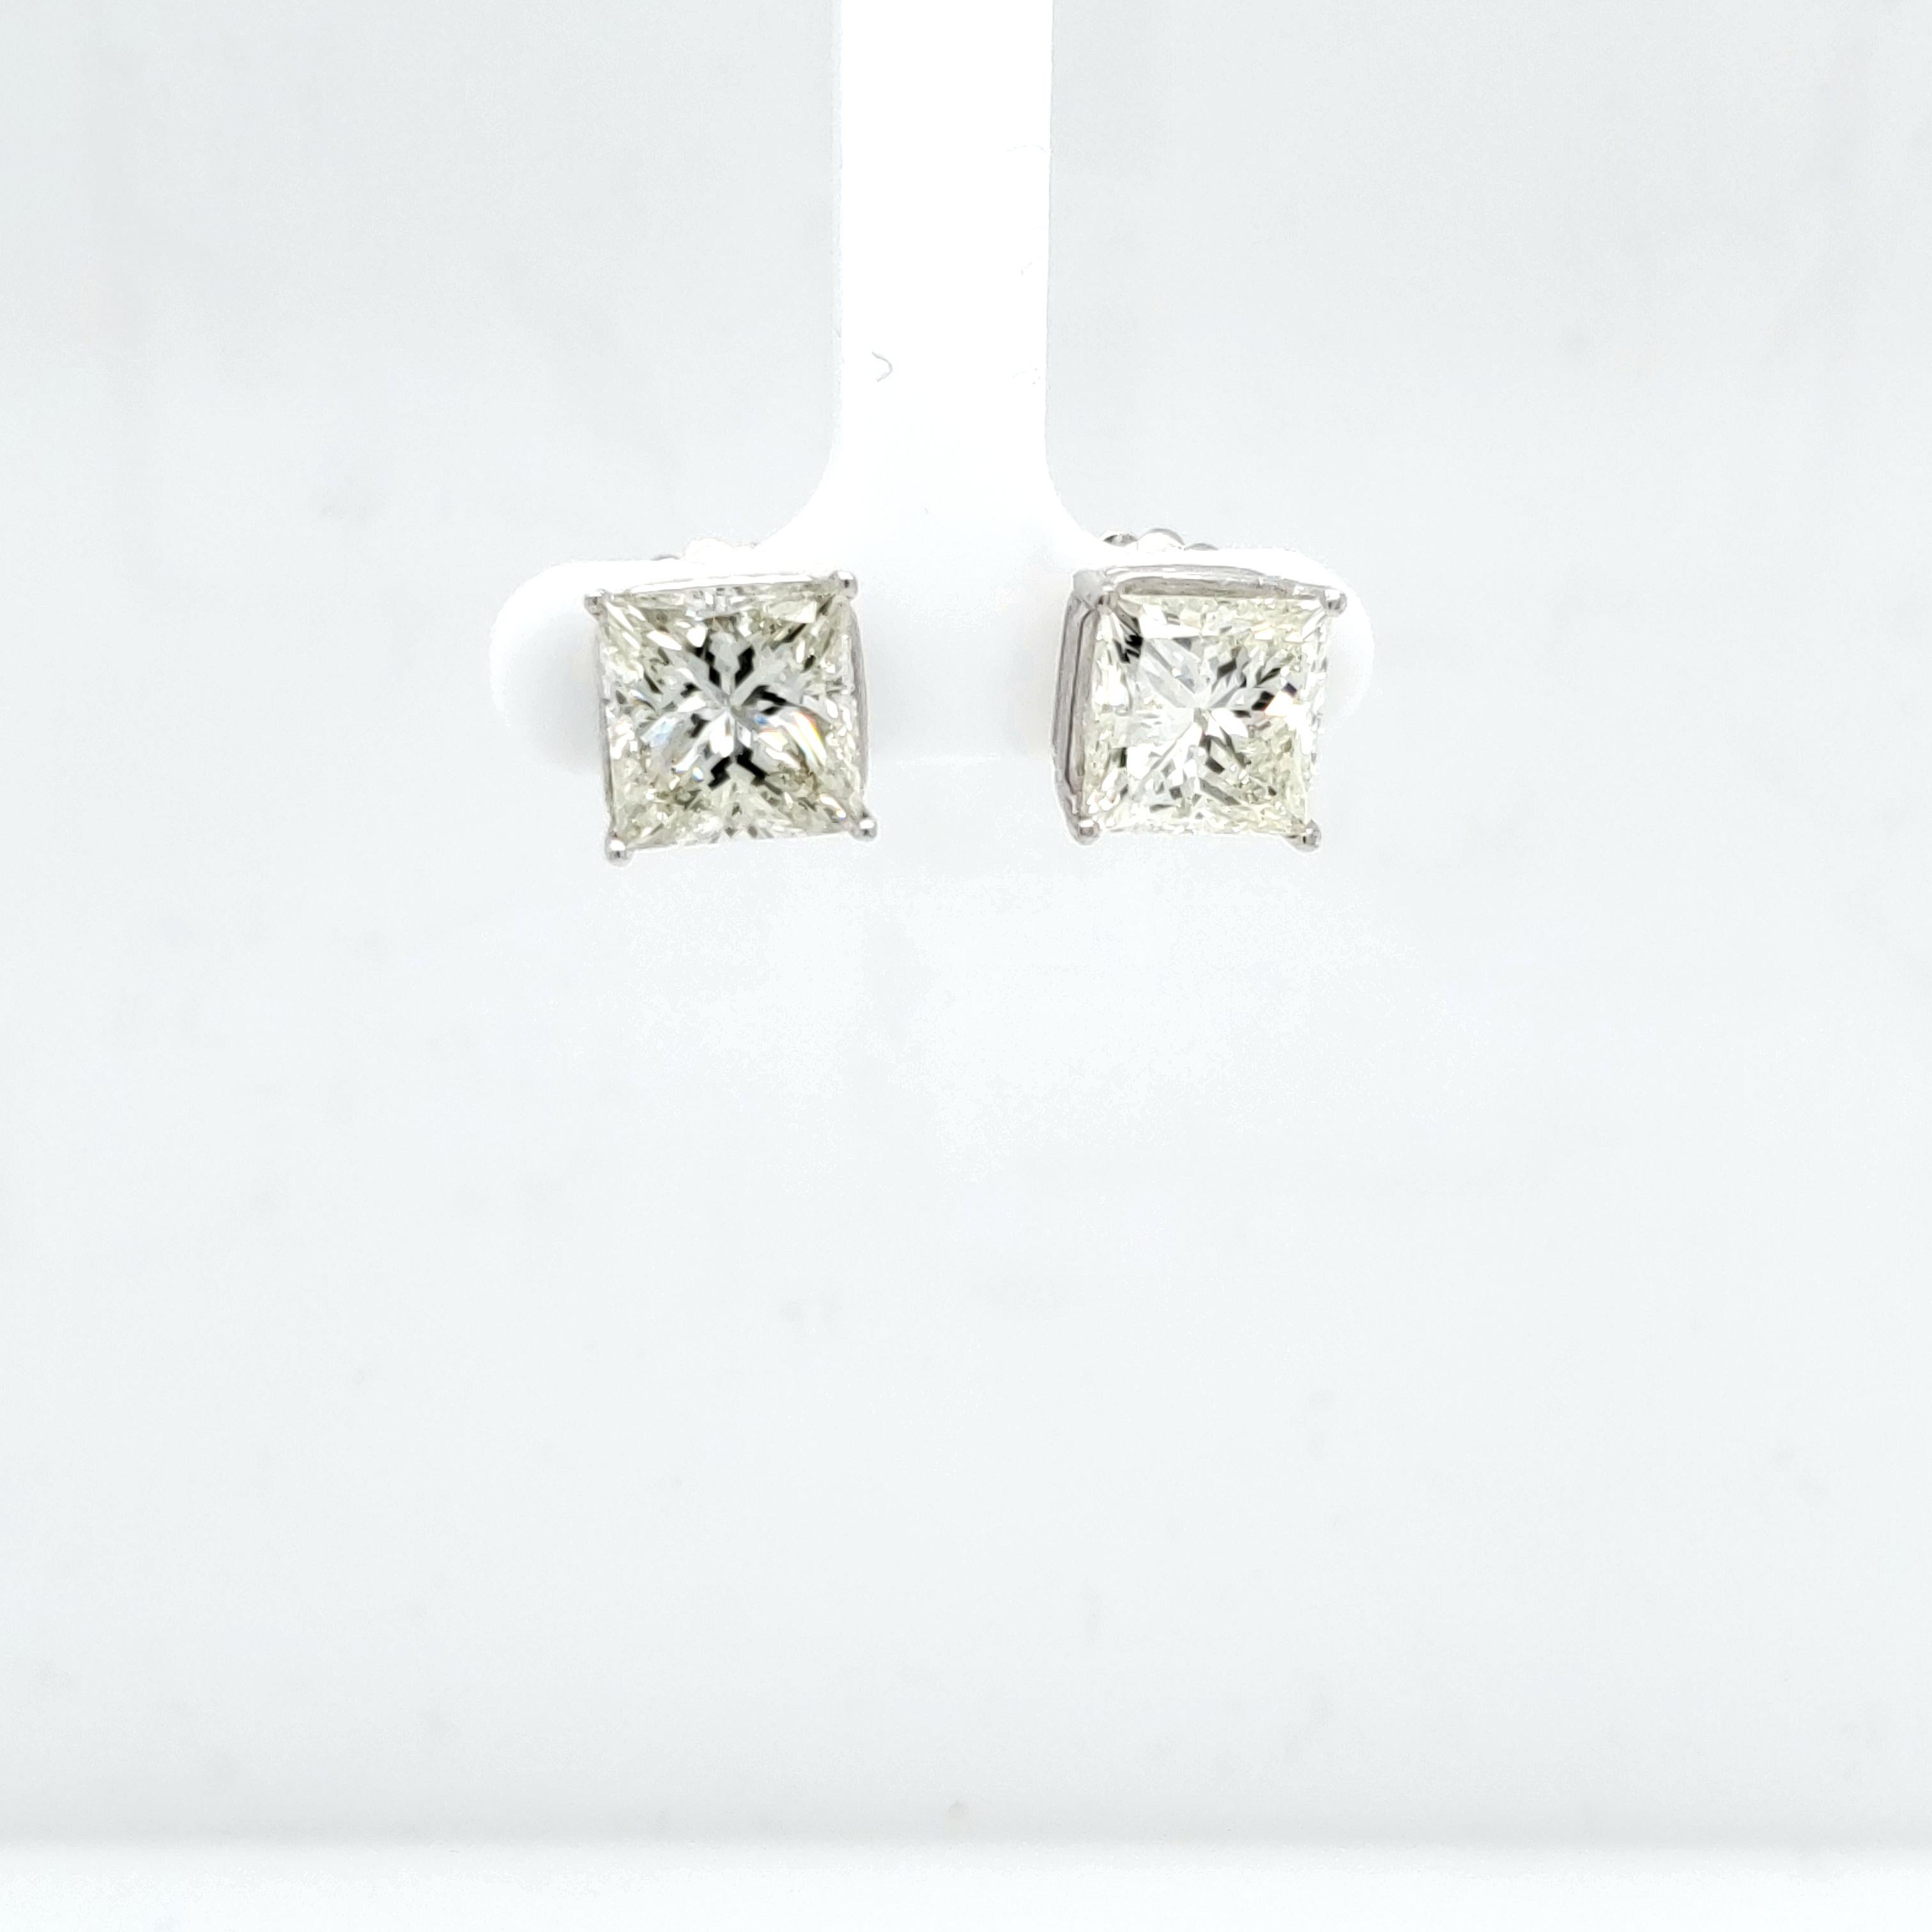 One Diamond weights 4.50 carats and the other weights 4.35 carats, Both are square princess cuts.The Diamonds are about K=L in color and Si1 in clarity. Not GIA certified. Set in 14k 4 prong studs. More shapes and sizes available. 